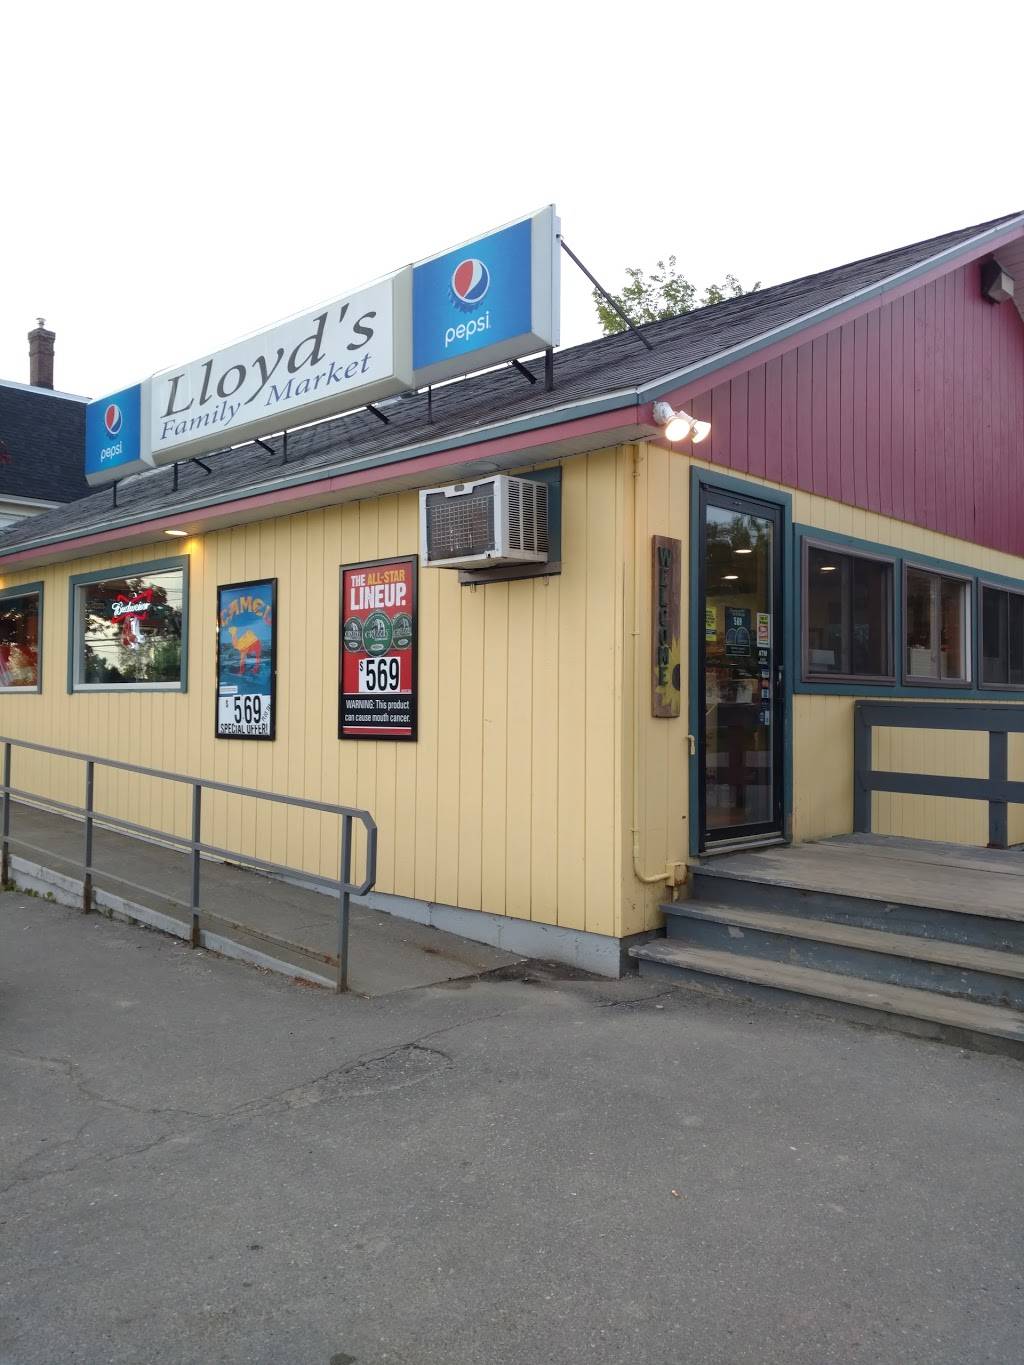 Lloyds Family Market | restaurant | 10 Gilman Falls Ave, Old Town, ME 04468, USA | 2078273701 OR +1 207-827-3701